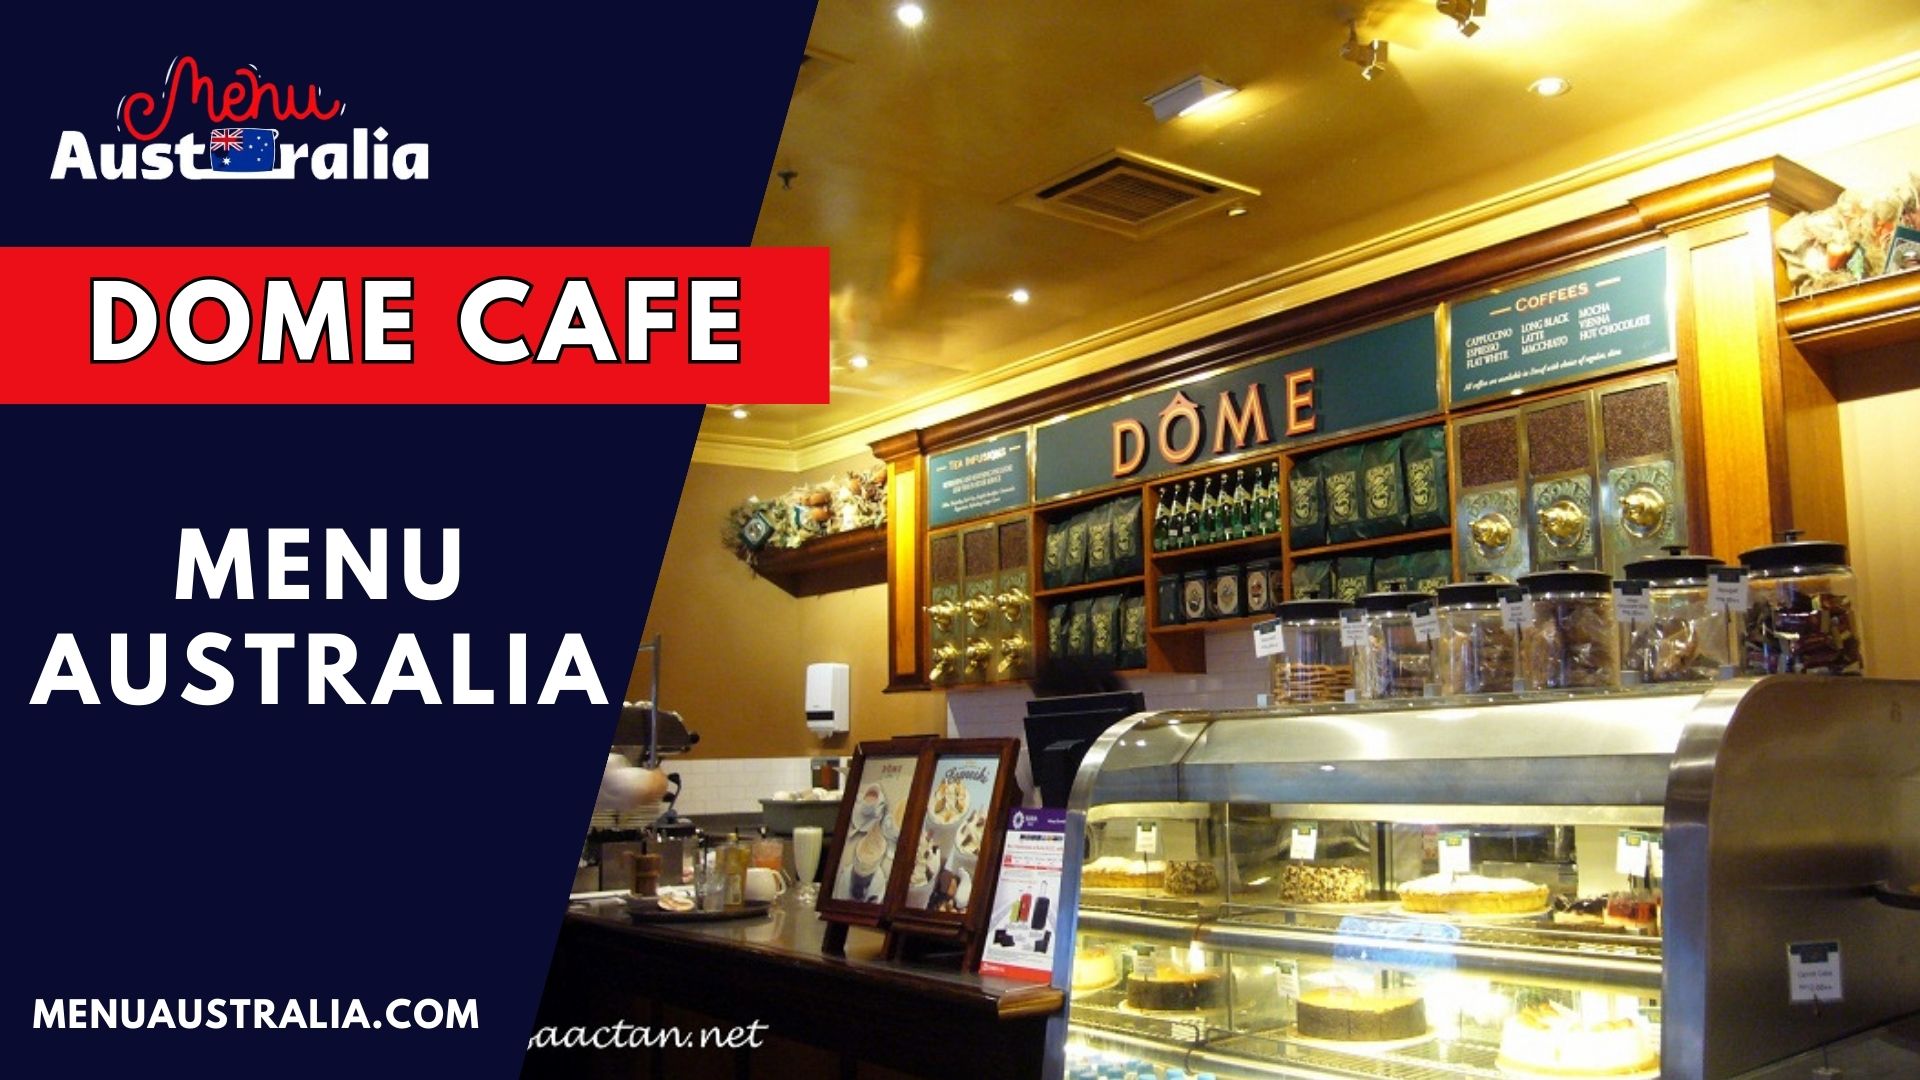 Showcasing Dome cafe indoor view including menu items